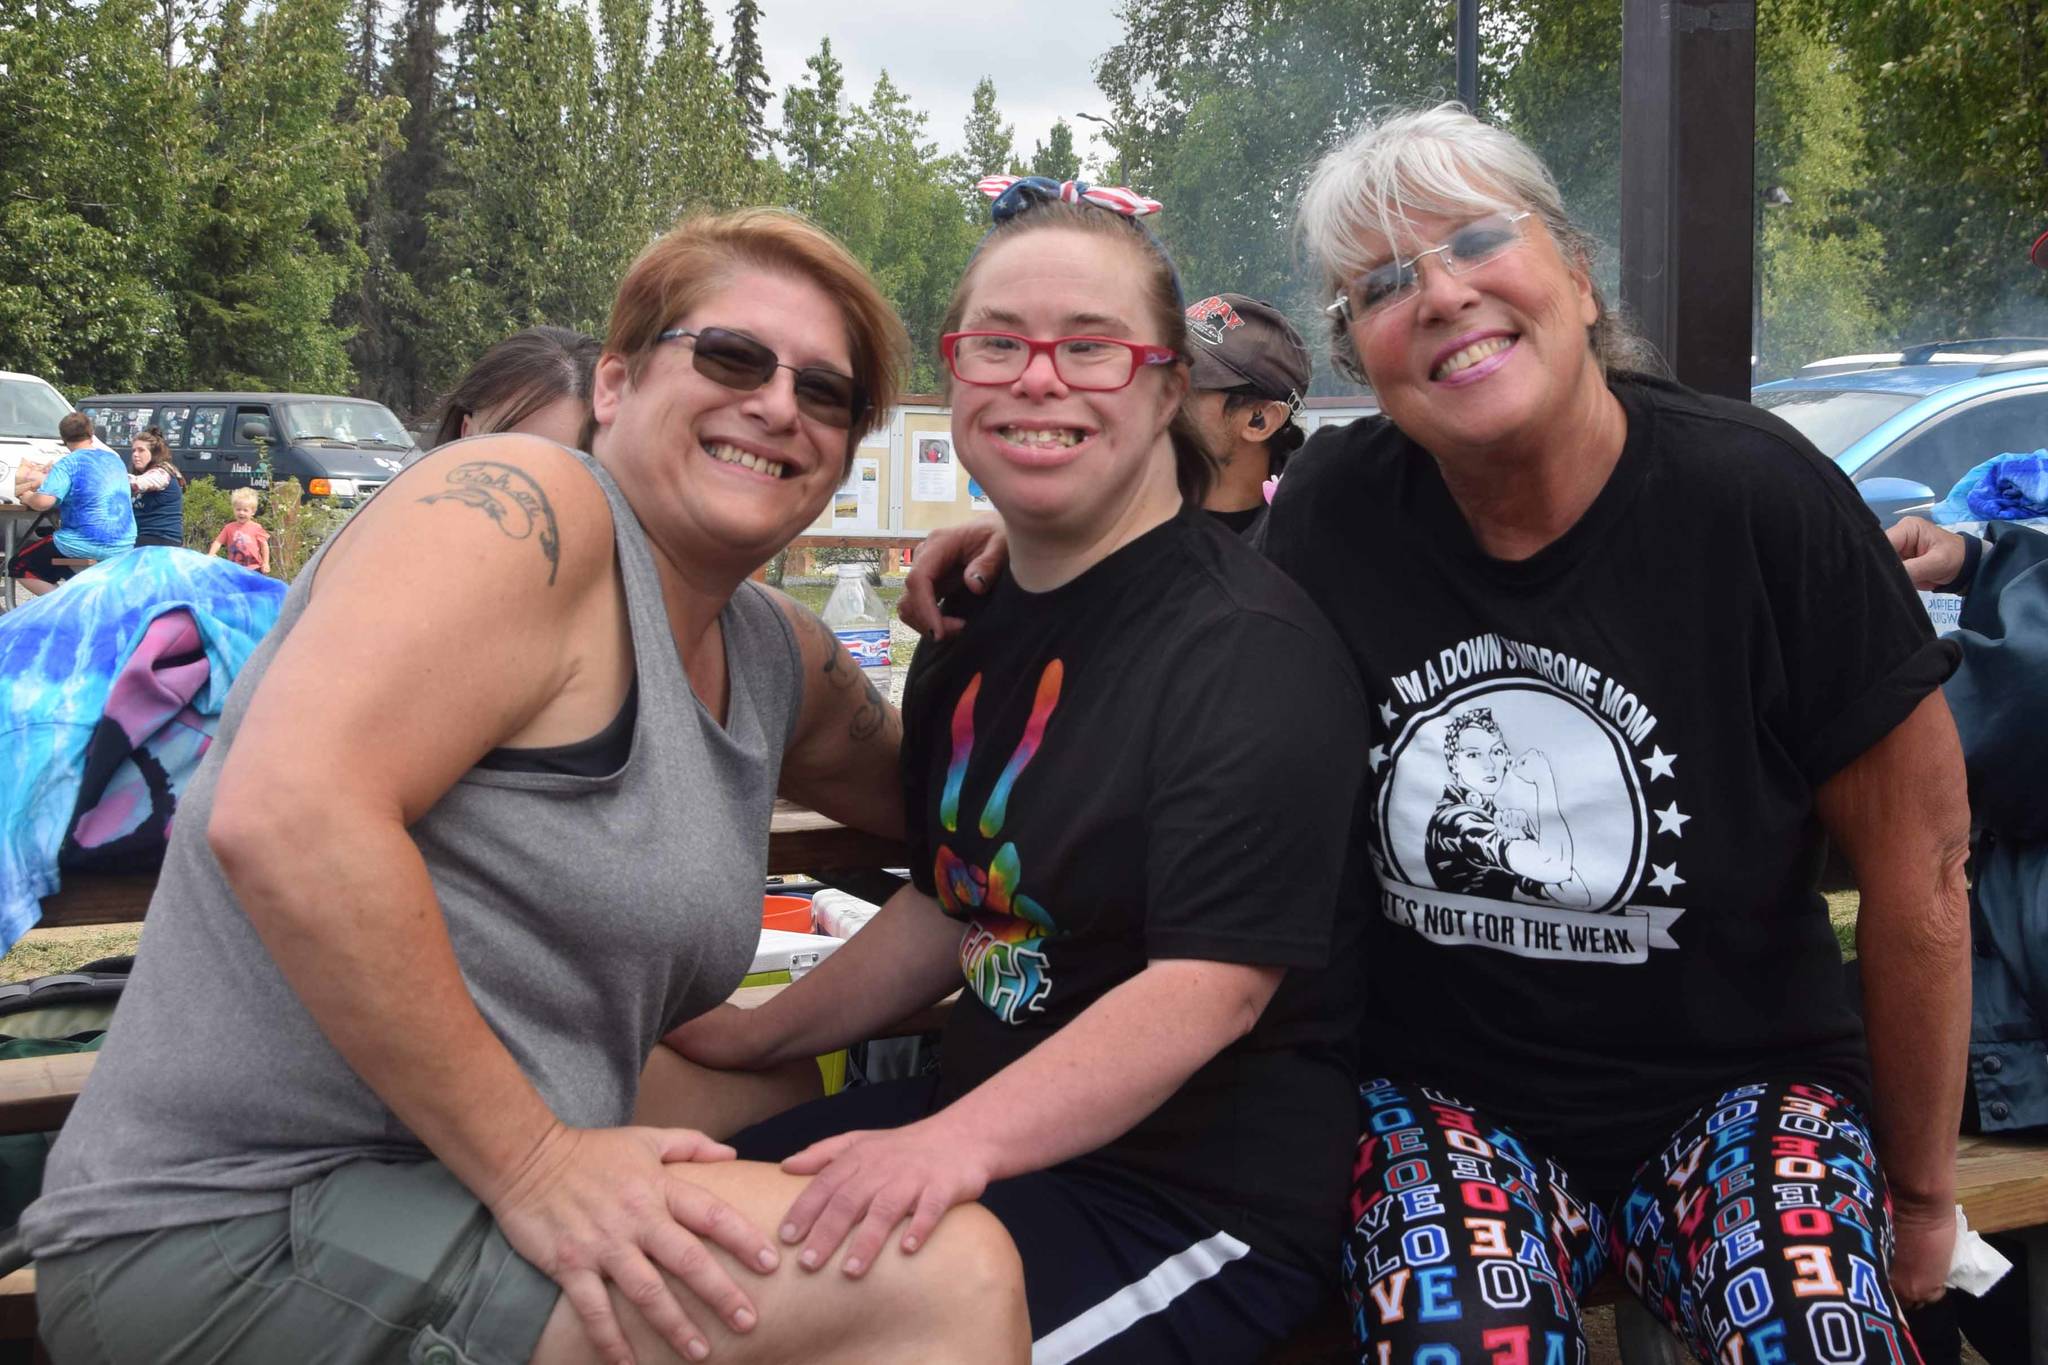 From left, Dee Roddis, Michelle Castro and Sybille Castro-Curry smile for the camera during the 2019 Disability Pride Celebration in Soldotna Creek Park on July 20, 2019. (Photo by Brian Mazurek/Peninsula Clarion)